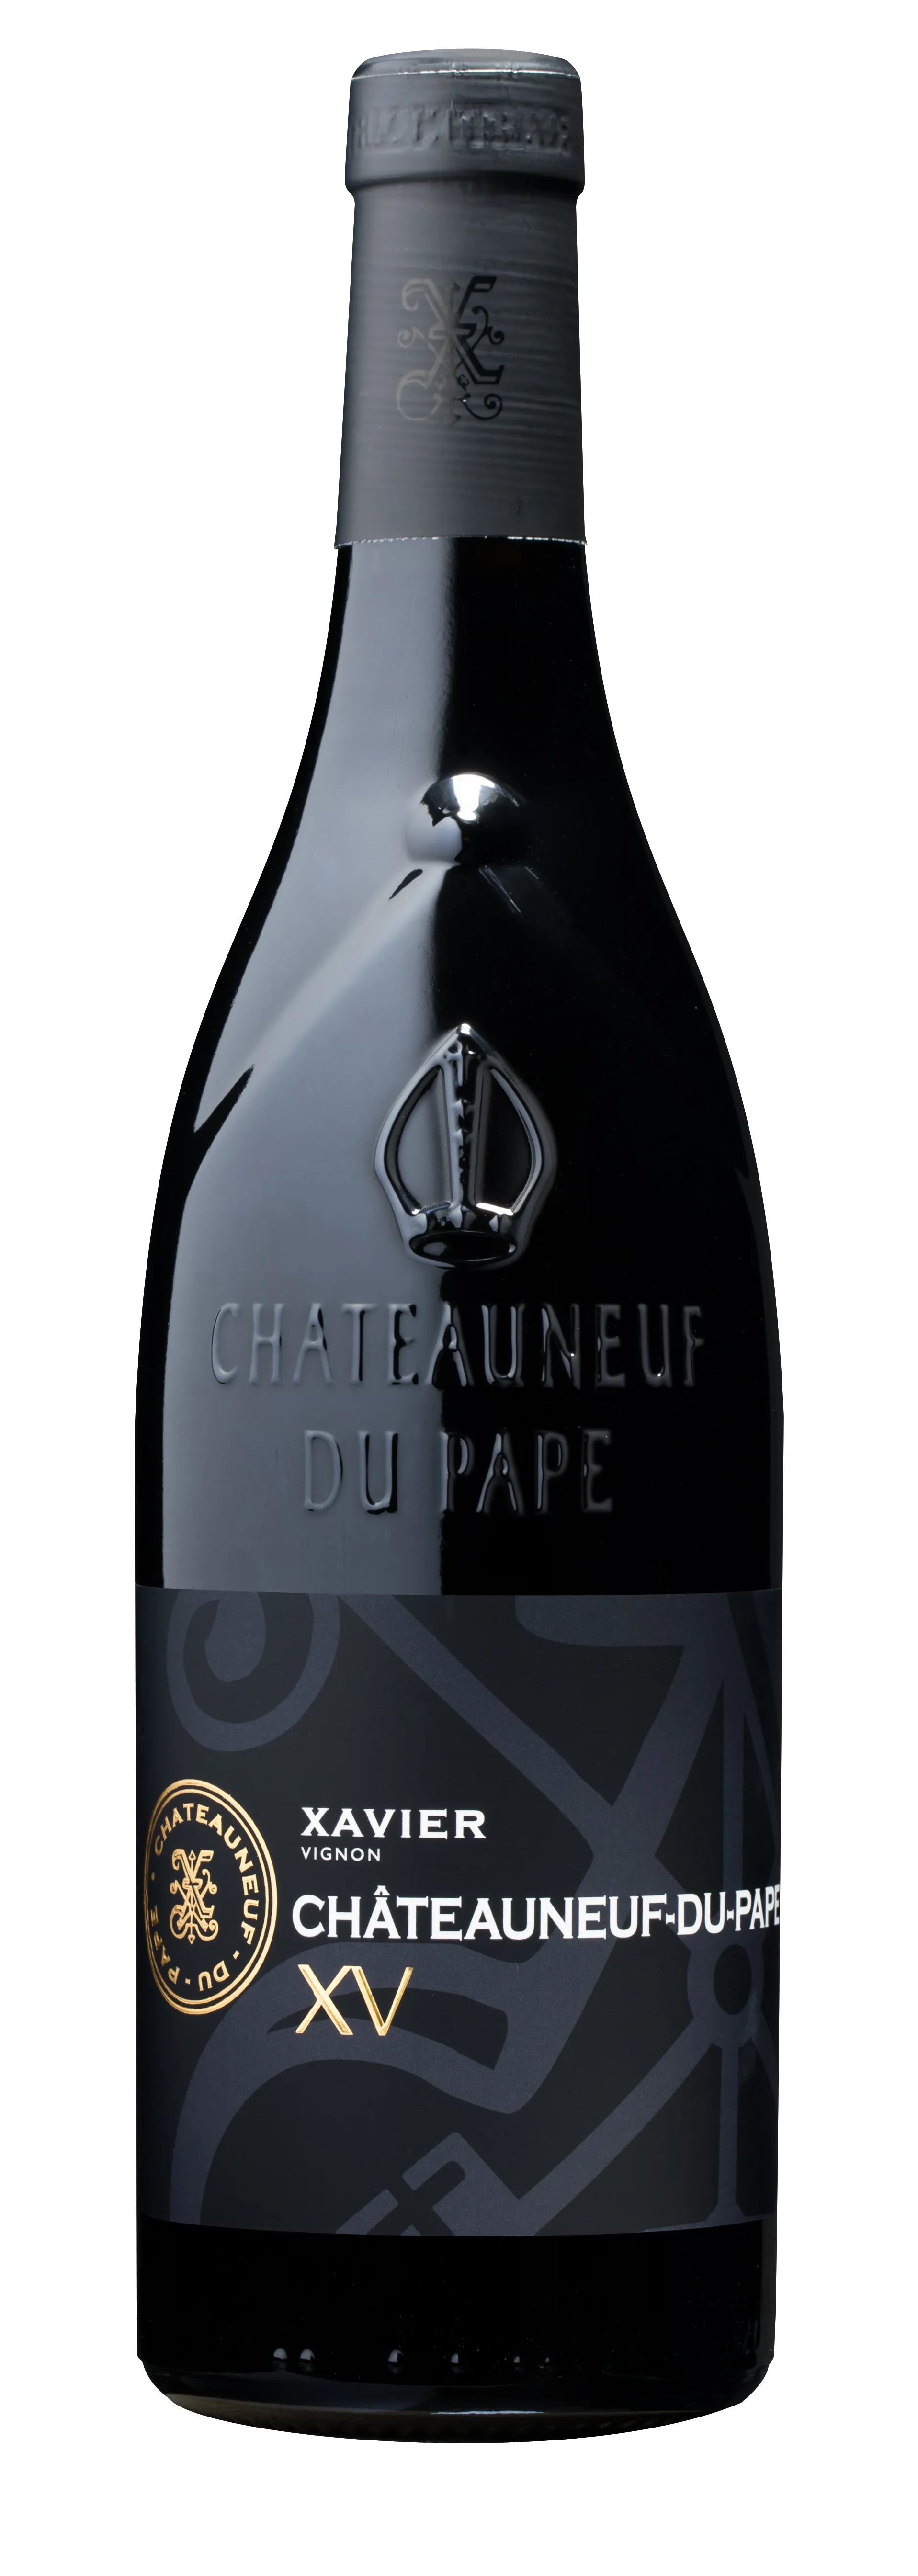 Bottle of Xavier Vignon Châteauneuf-du-Pape from search results